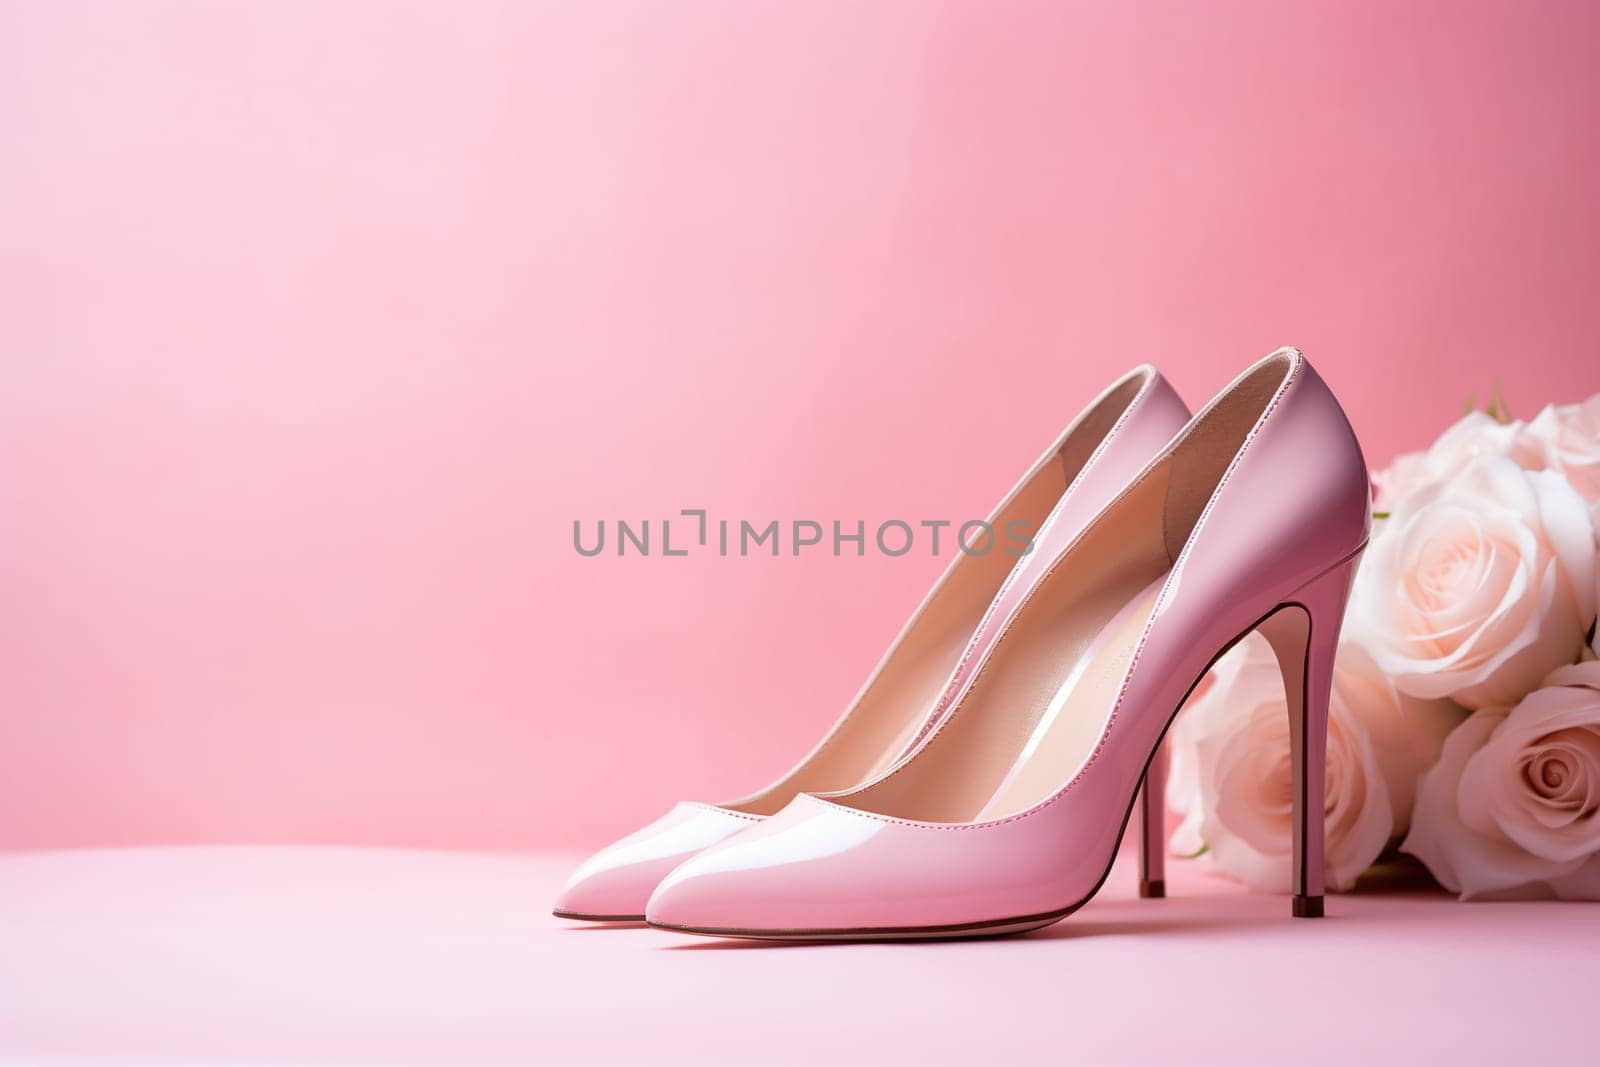 Elegant women's shoes made of pink leather on a pink background with a bouquet of roses. Women's wedding shoes, side view. Generated by artificial intelligence